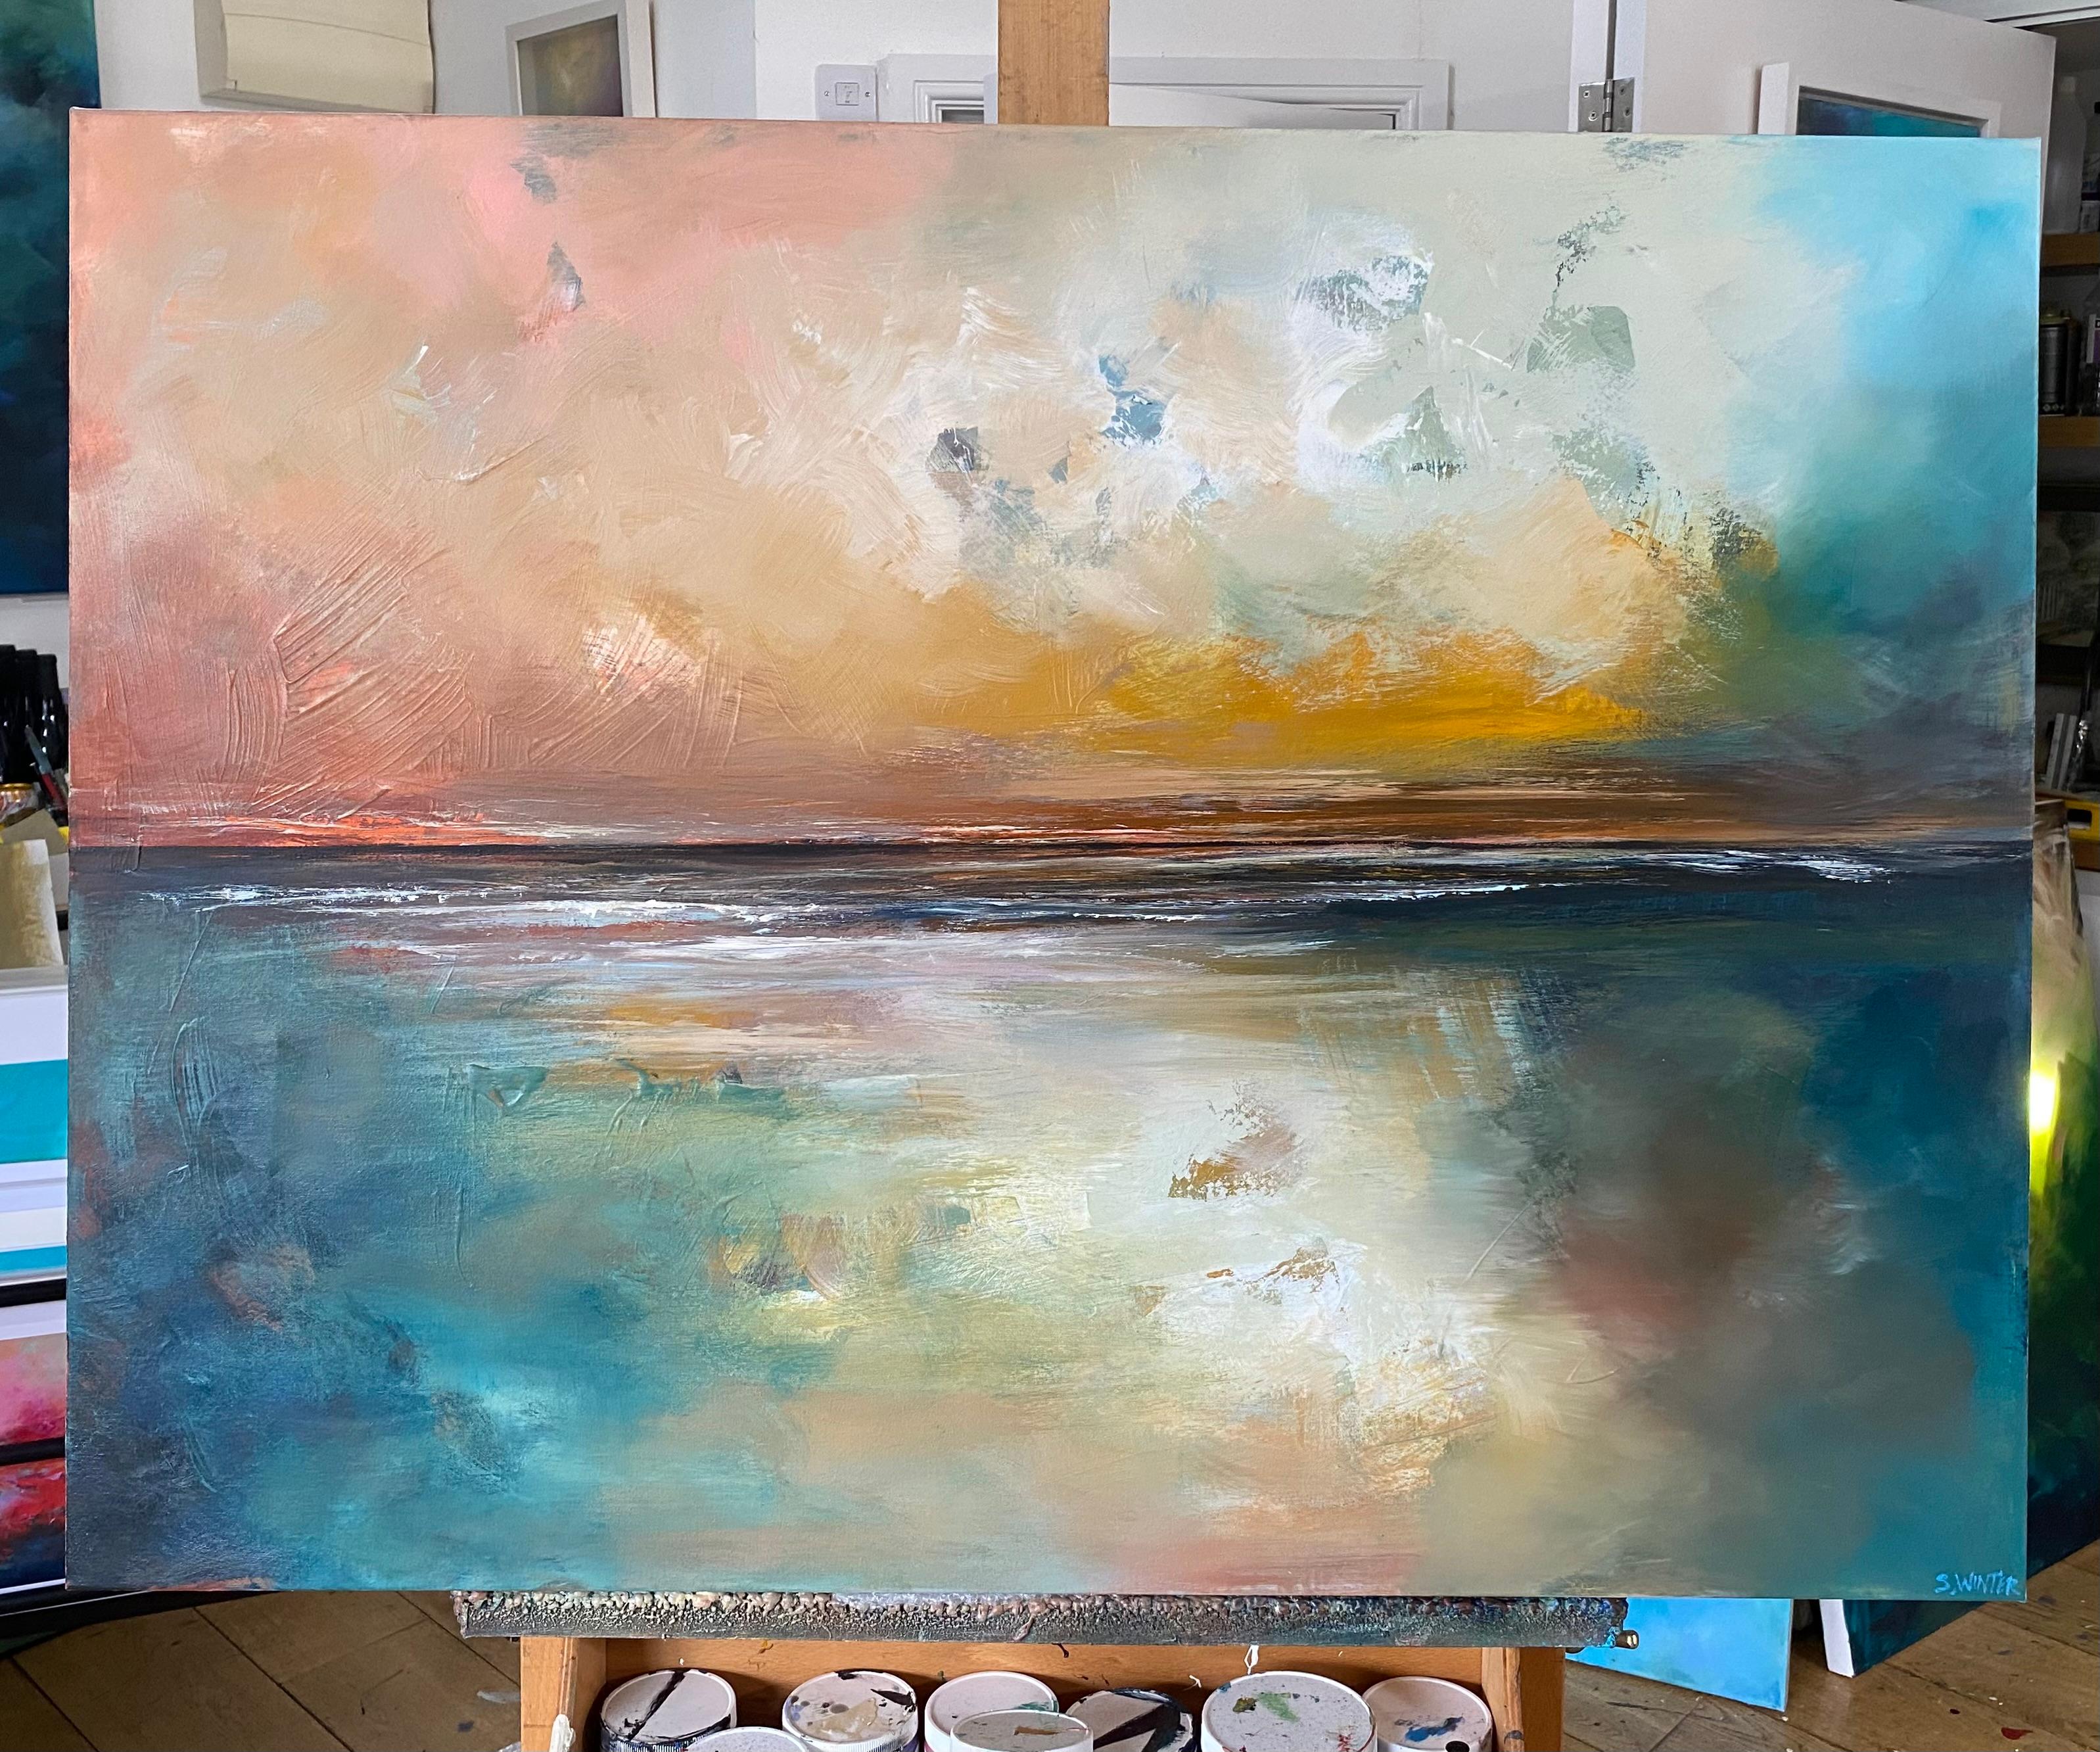 Cool Tranquility' is a soft, calm painting of the Isle Of Wight's stunning horizon. The atmospheric mood captures the serenity of the scene.

Additional information:
Original Painting
Acrylic on canvas
Signed by artist
SOLD UNFRAMED

Image size: